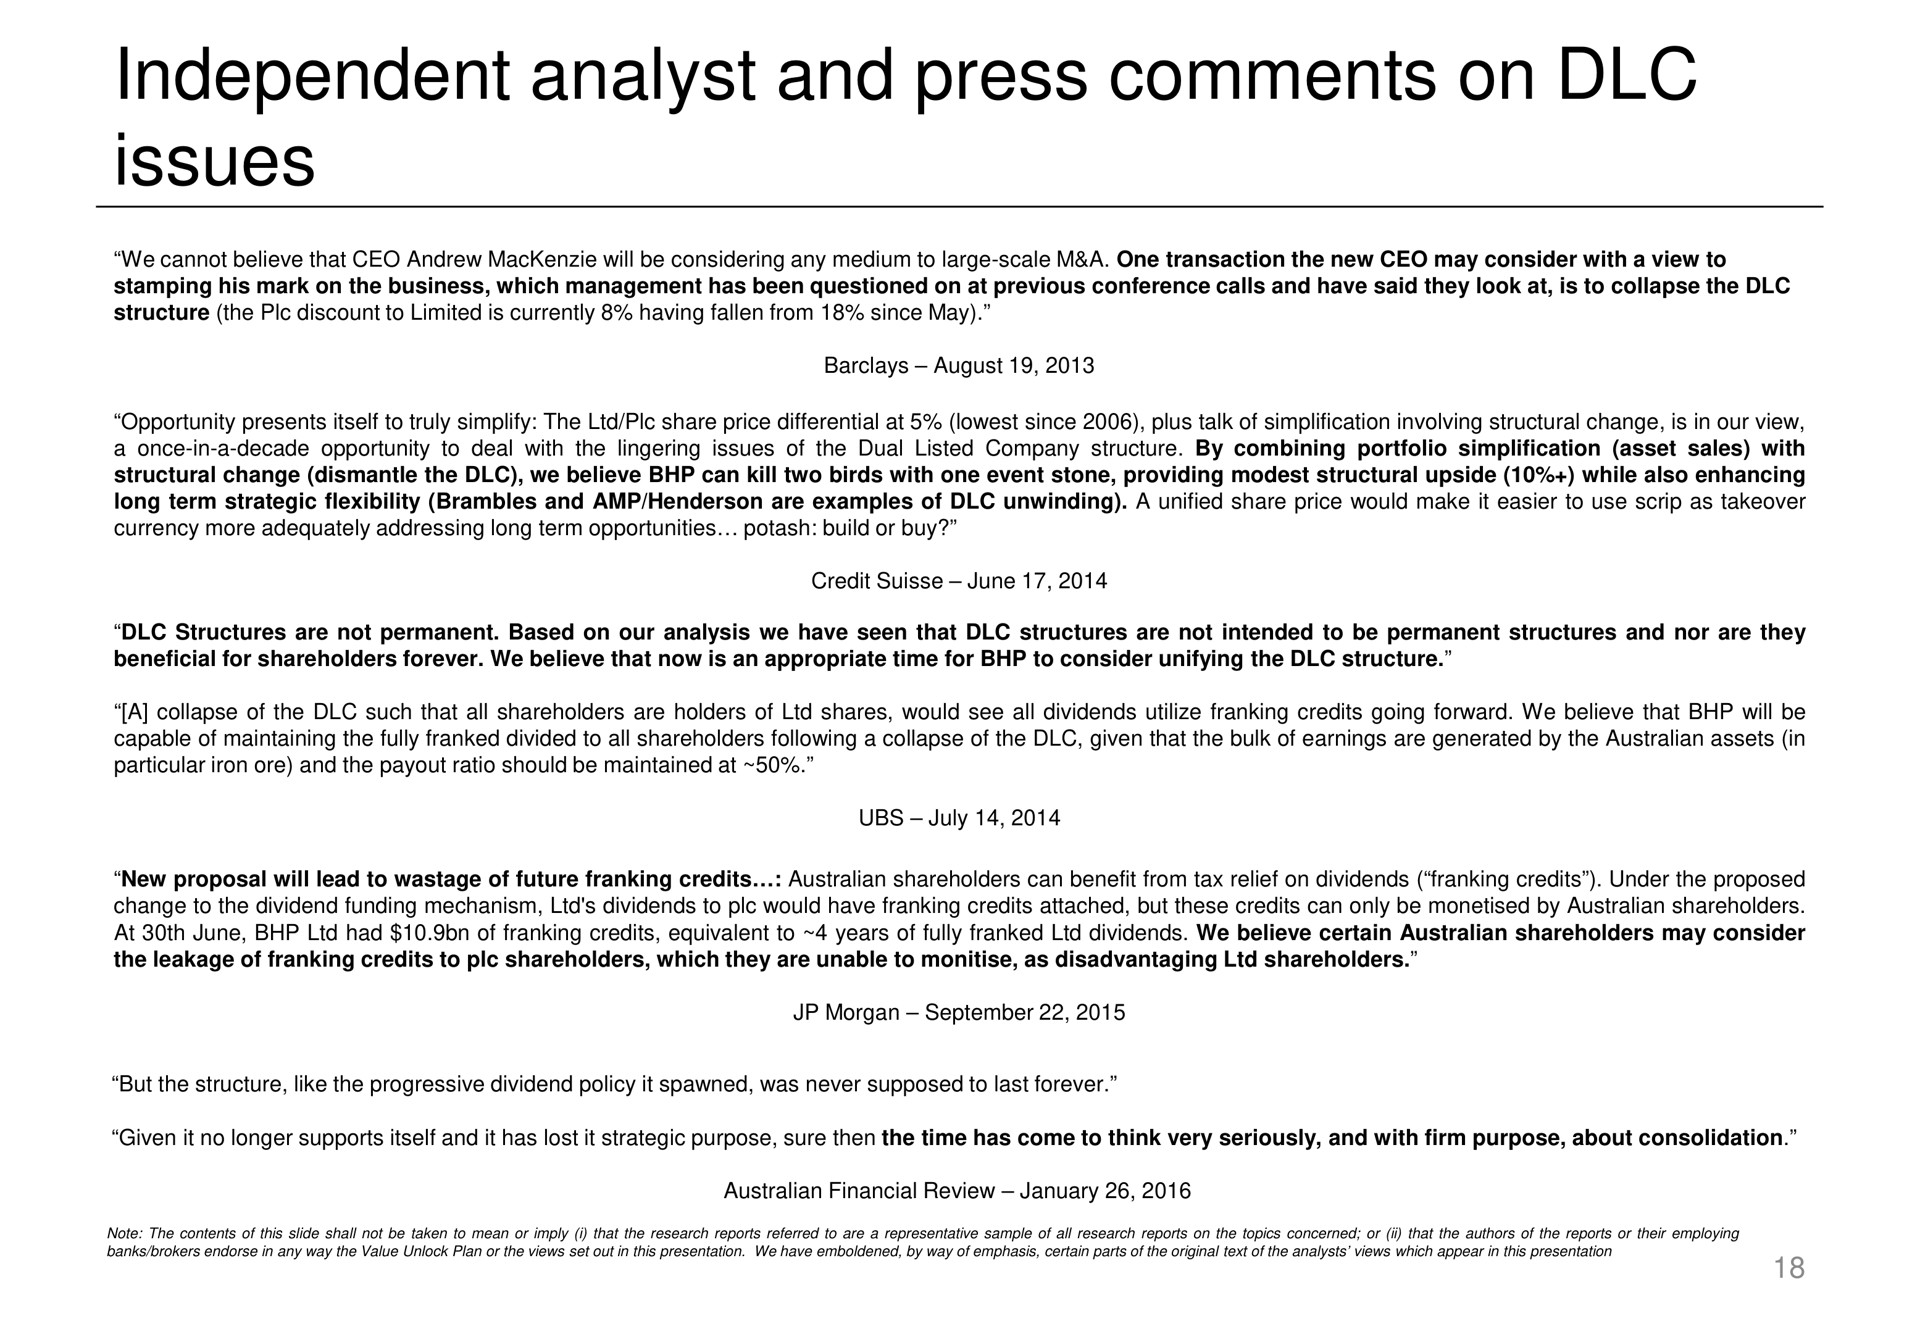 independent analyst and press comments on issues | Elliott Management